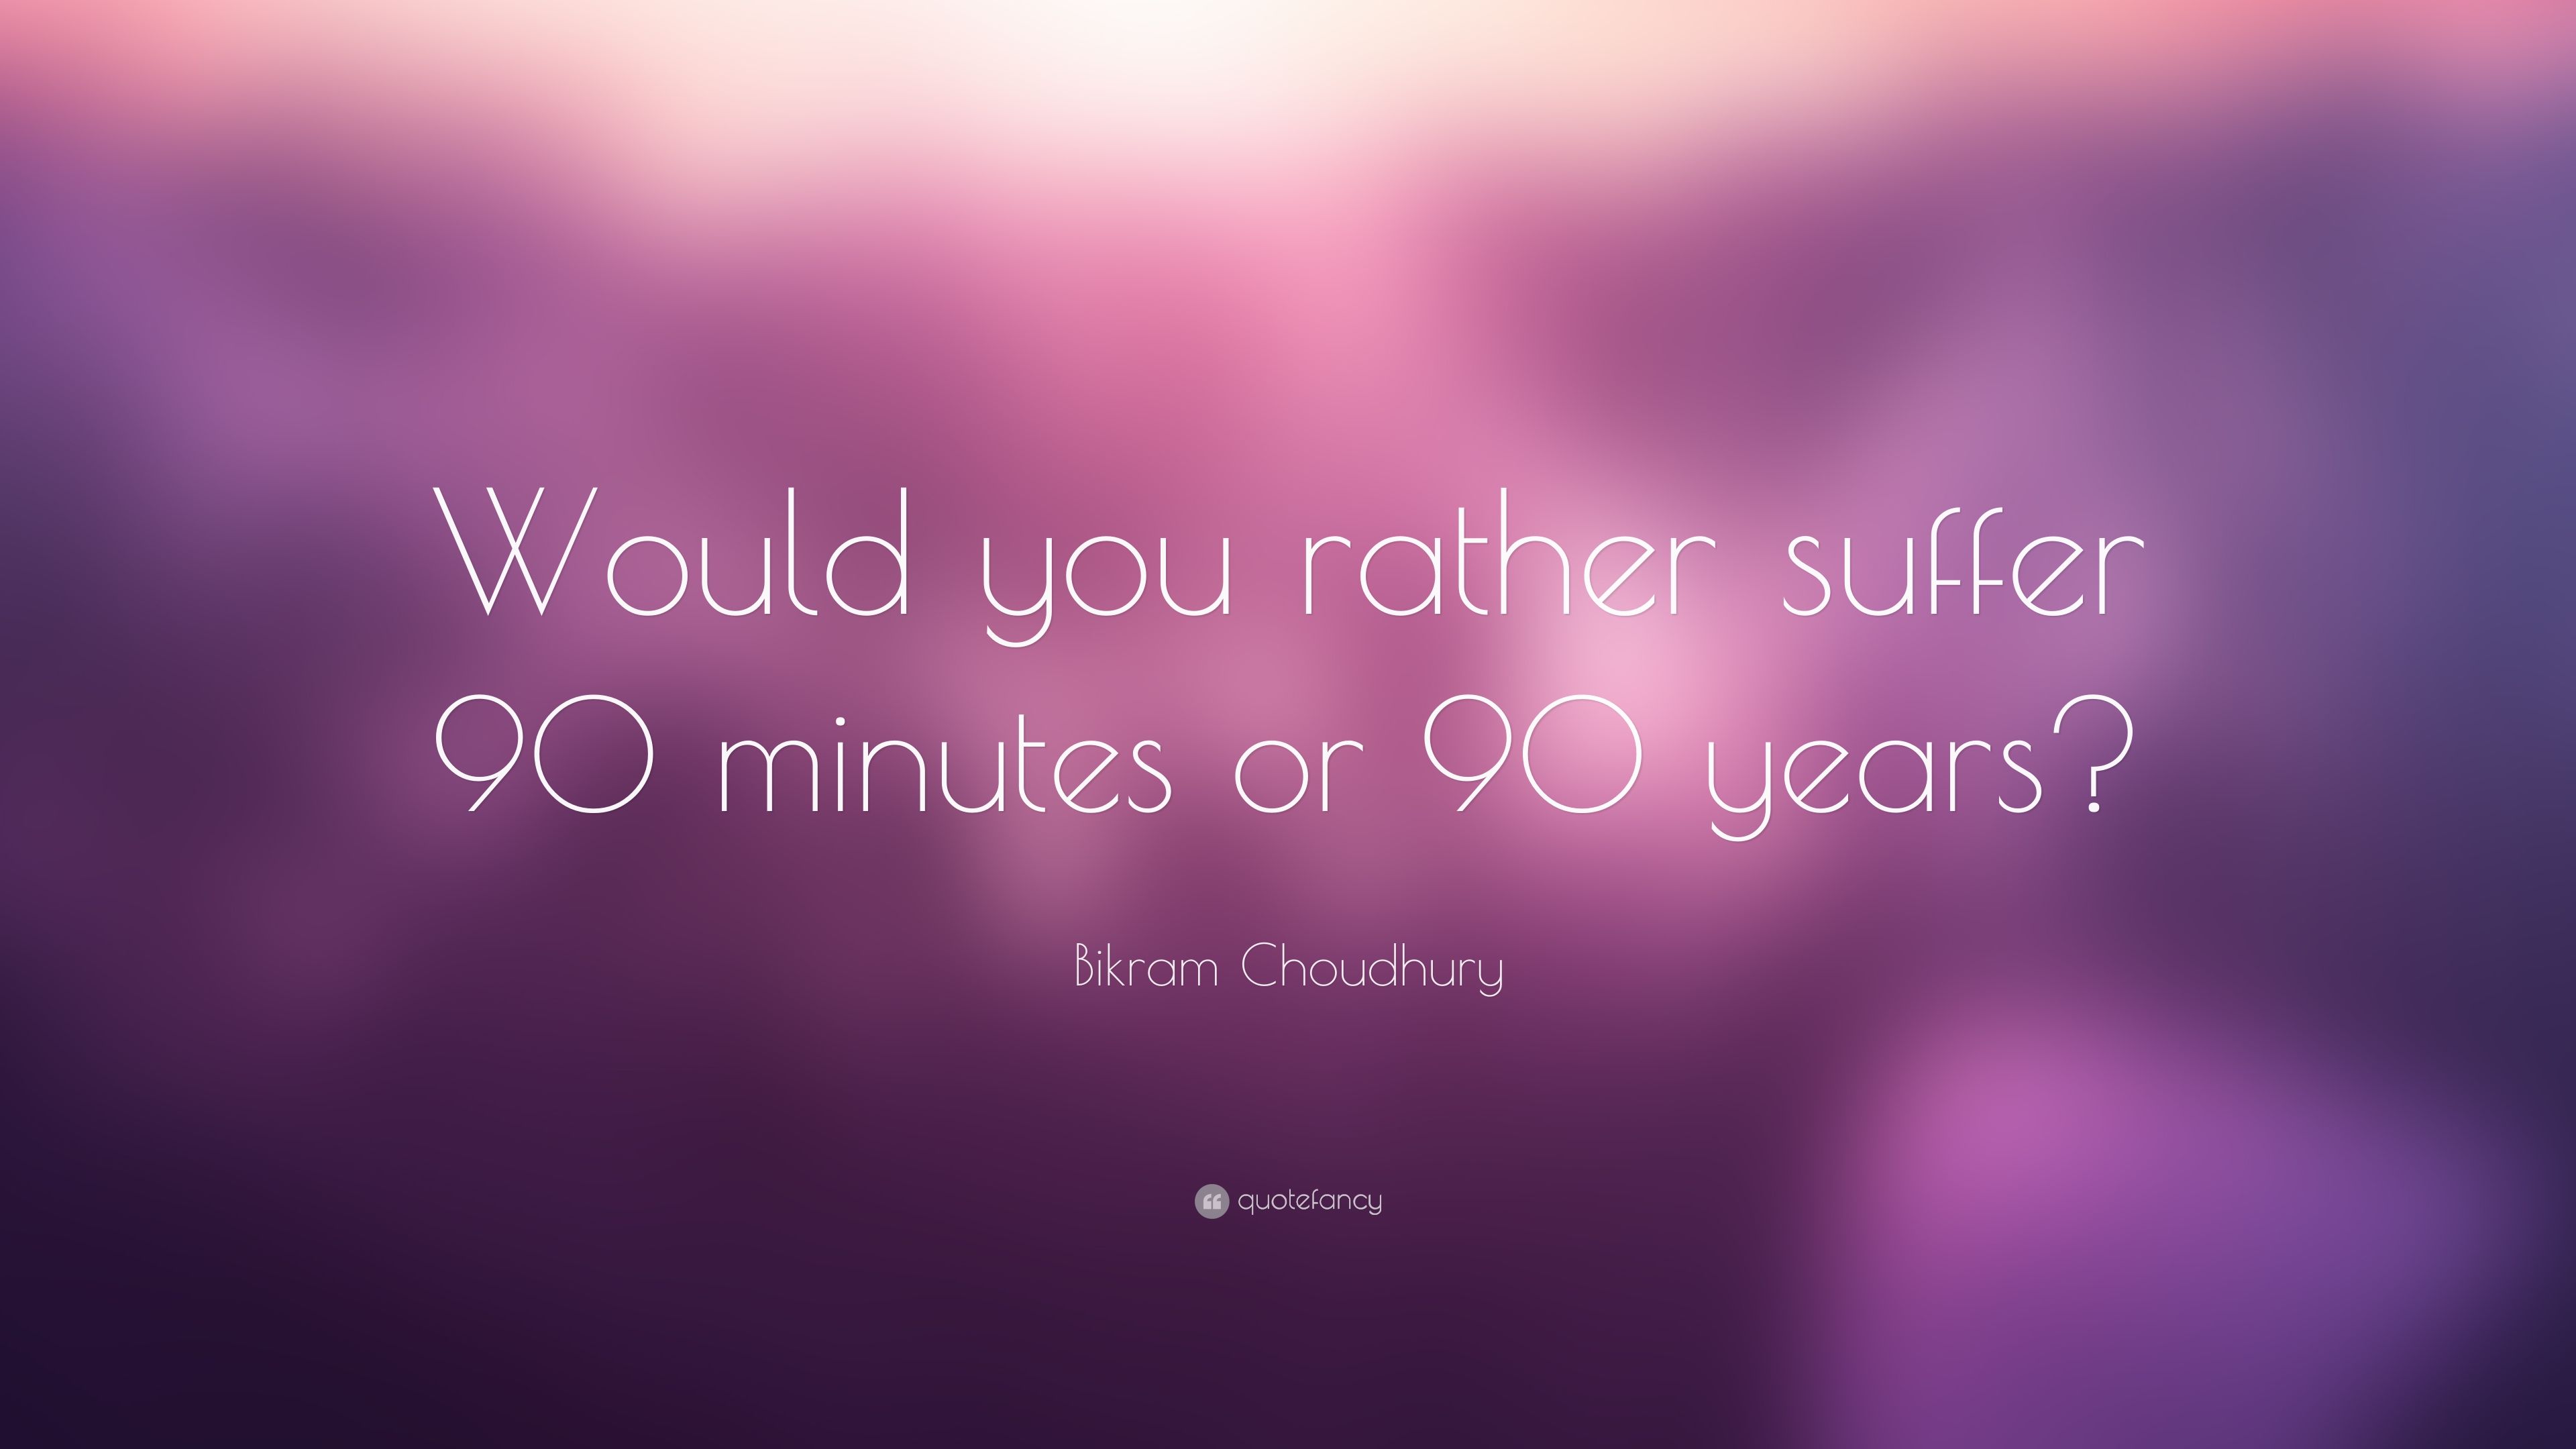 Bikram Choudhury Quote: “Would you rather suffer 90 minutes or 90 years?” (7 wallpaper)